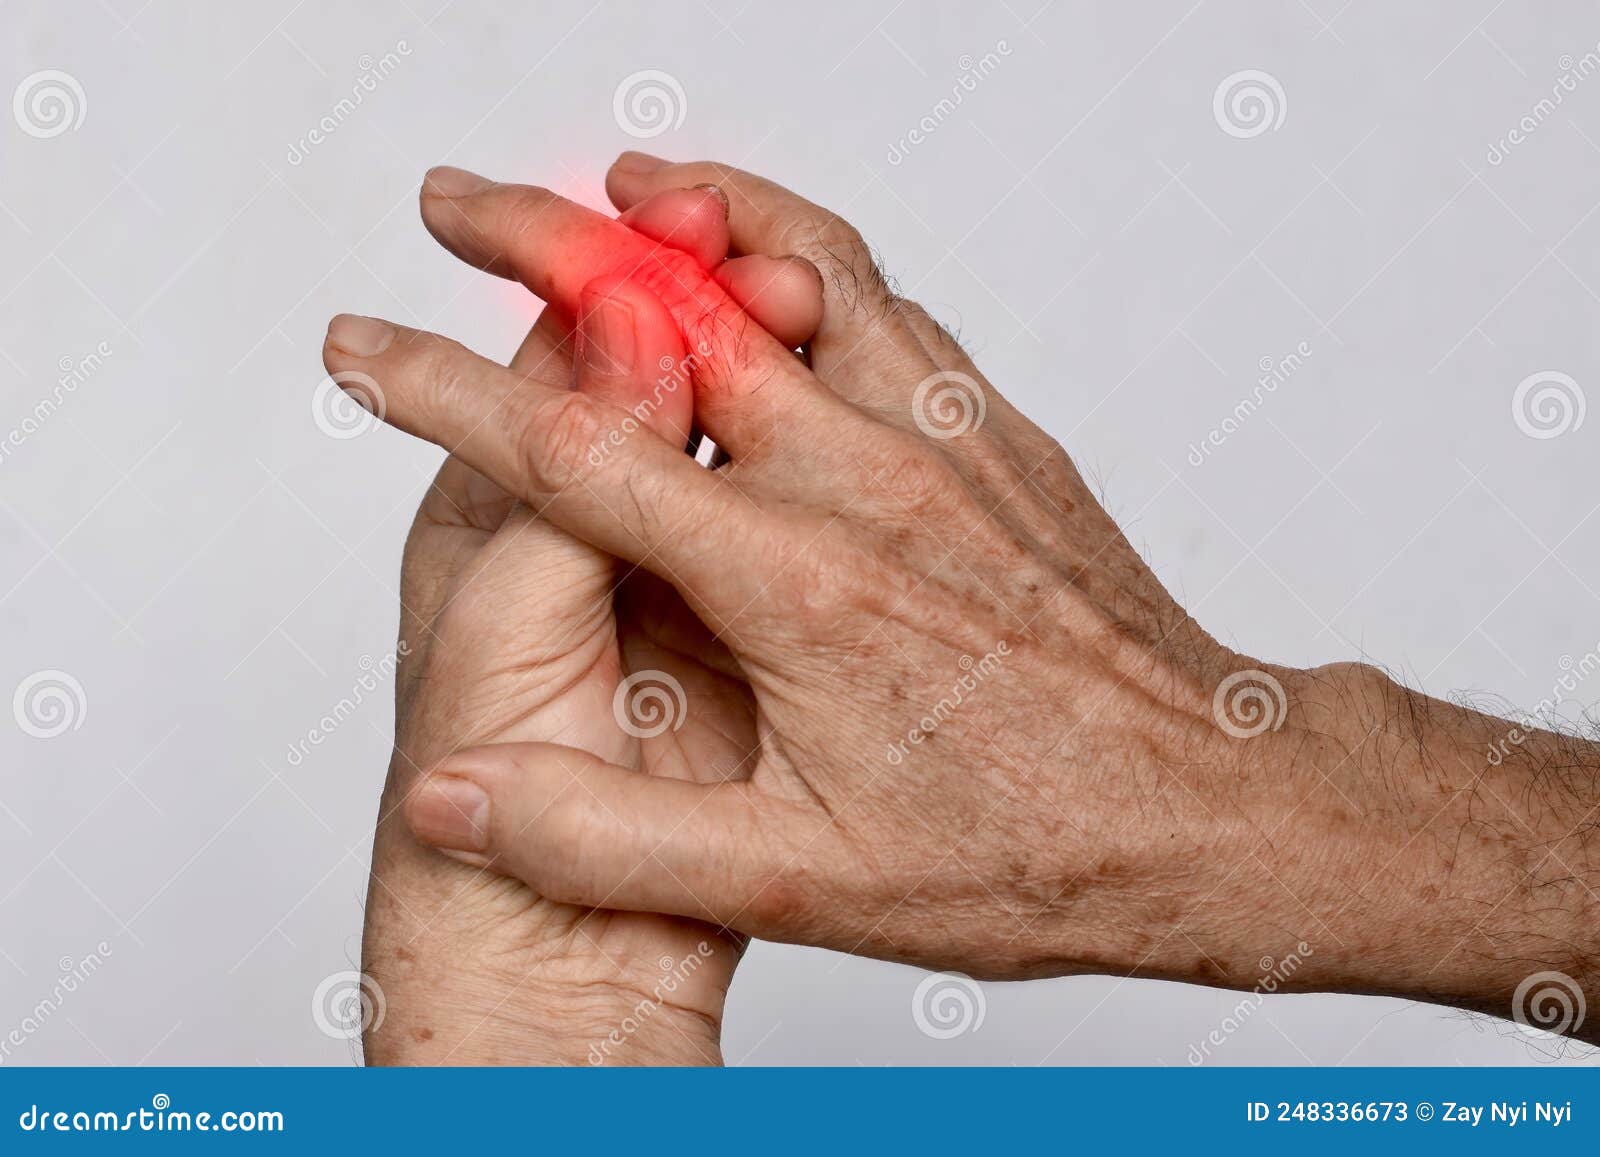 inflammation of asian man middle finger and hand. concept of arthritis or cellulitis